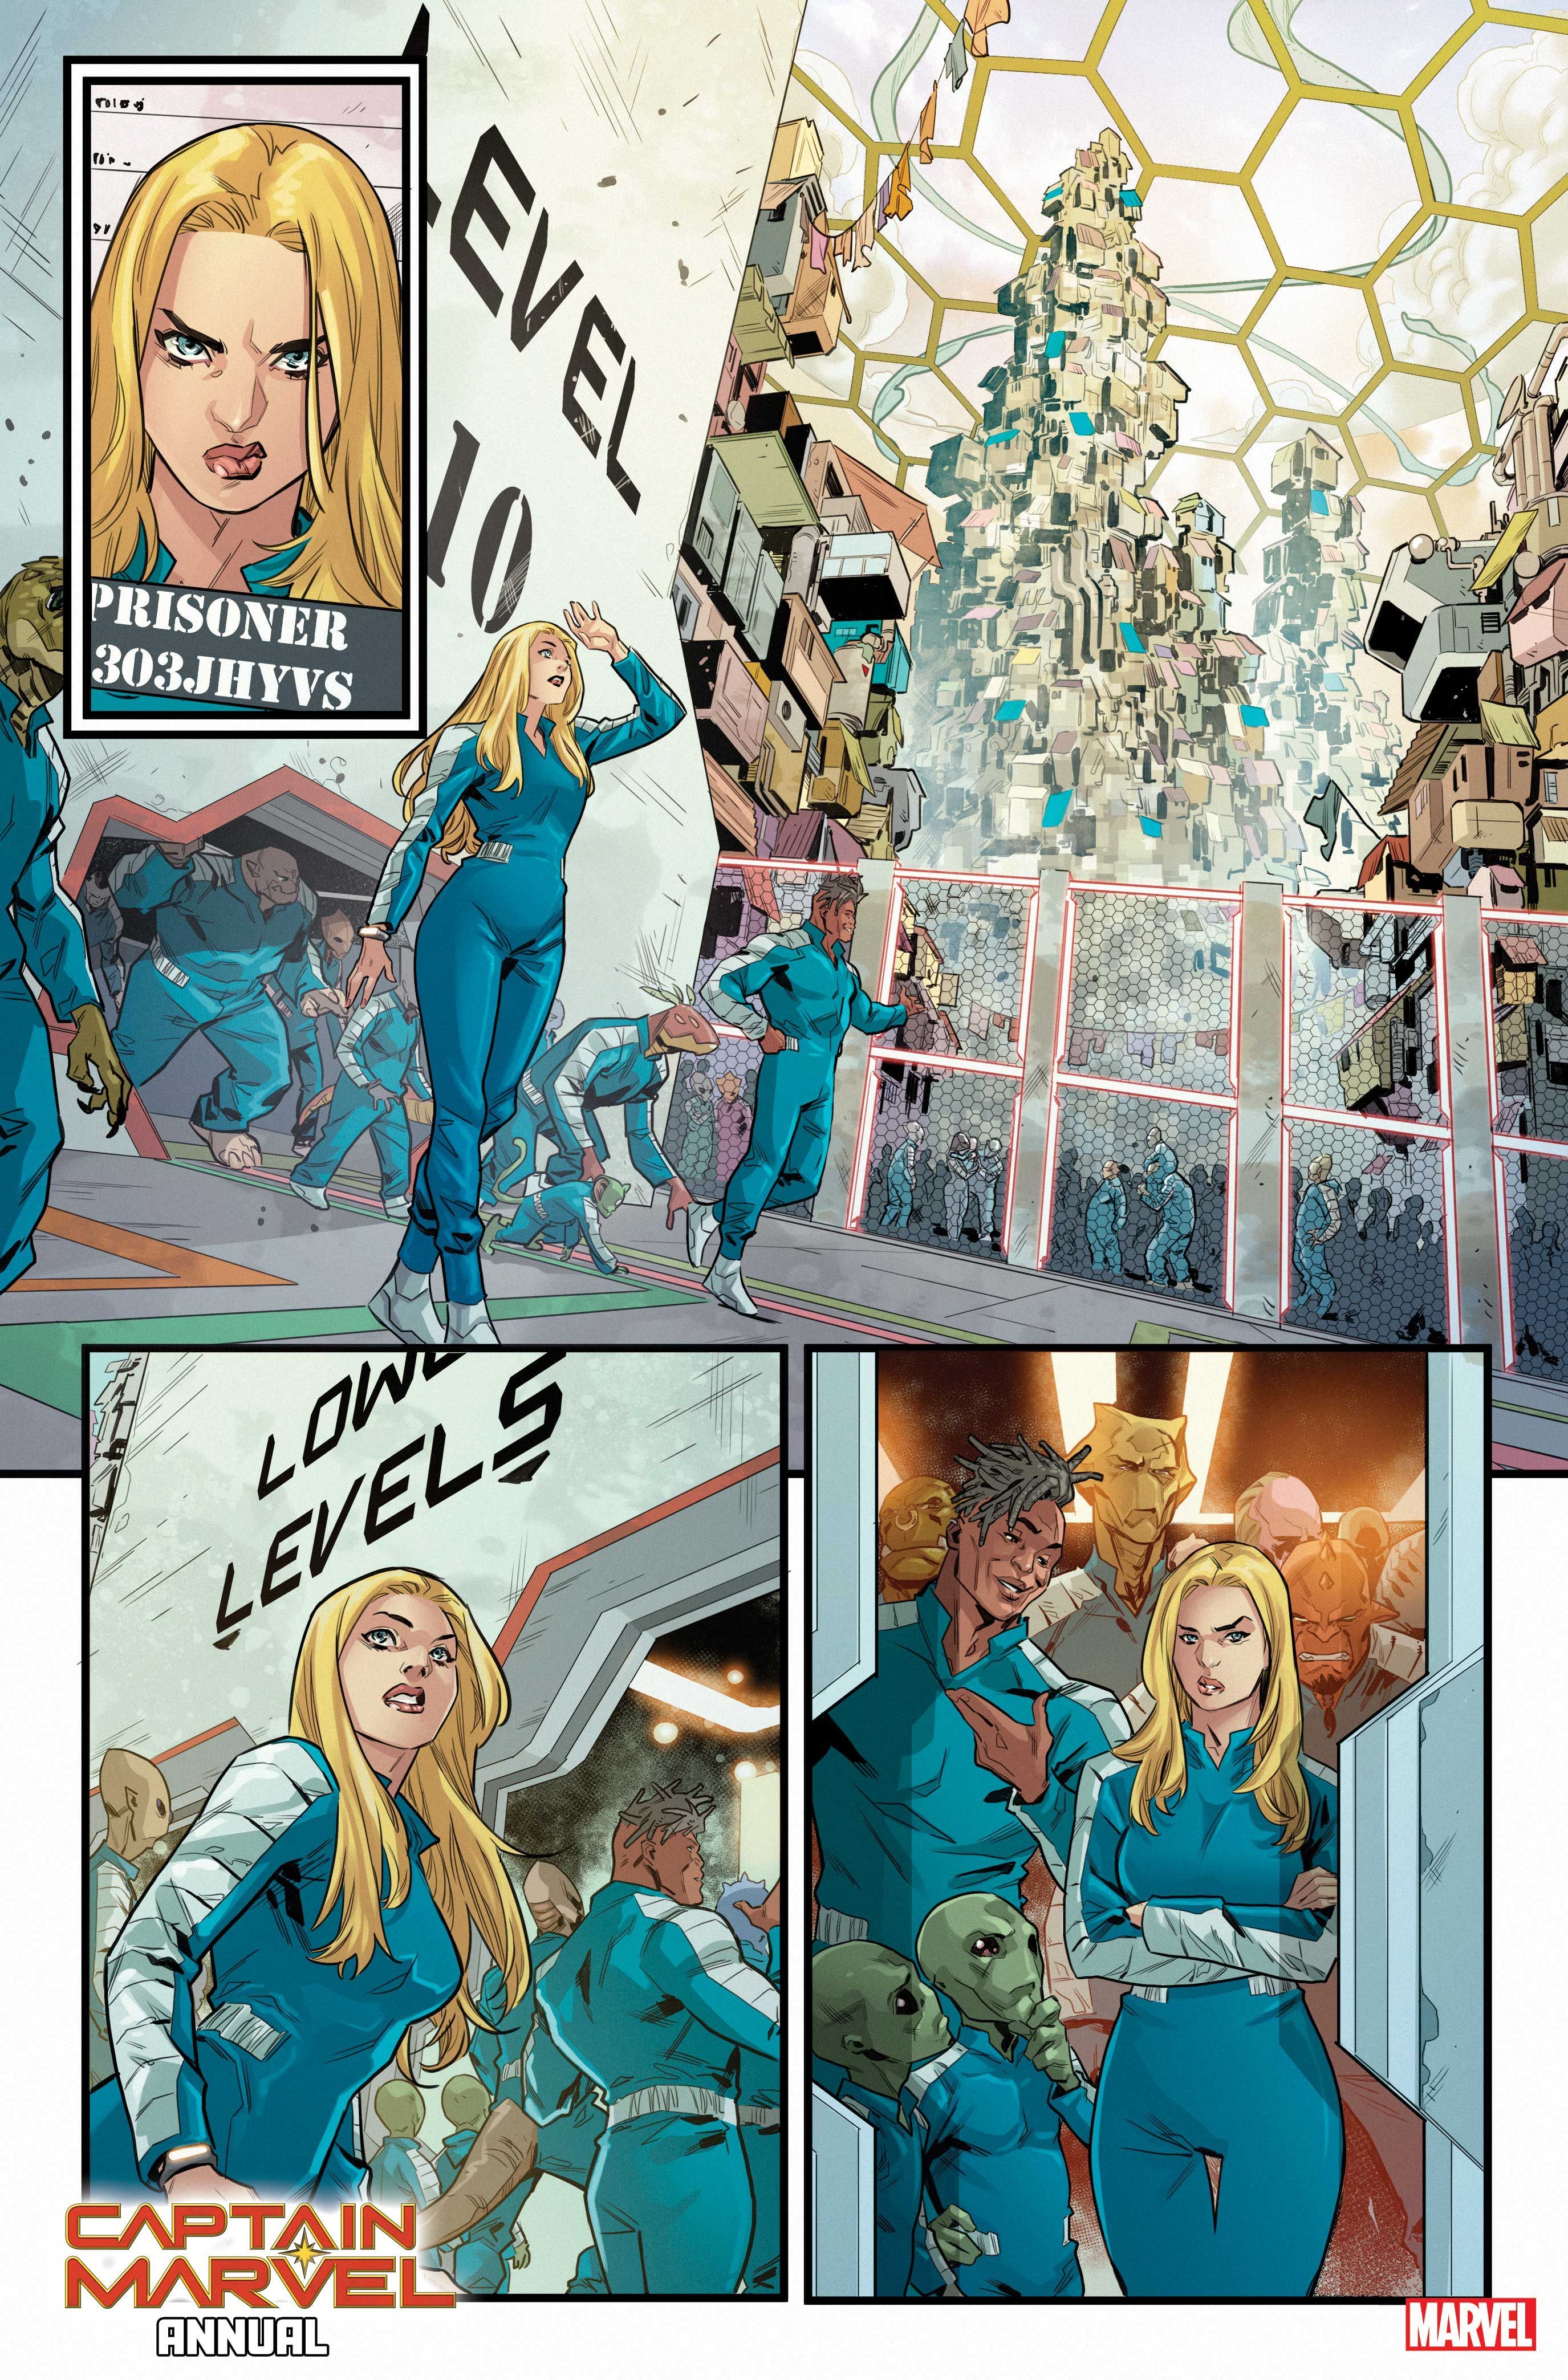 Captain Marvel Breaks Out of Prison After an Intergalactic Bar Fight